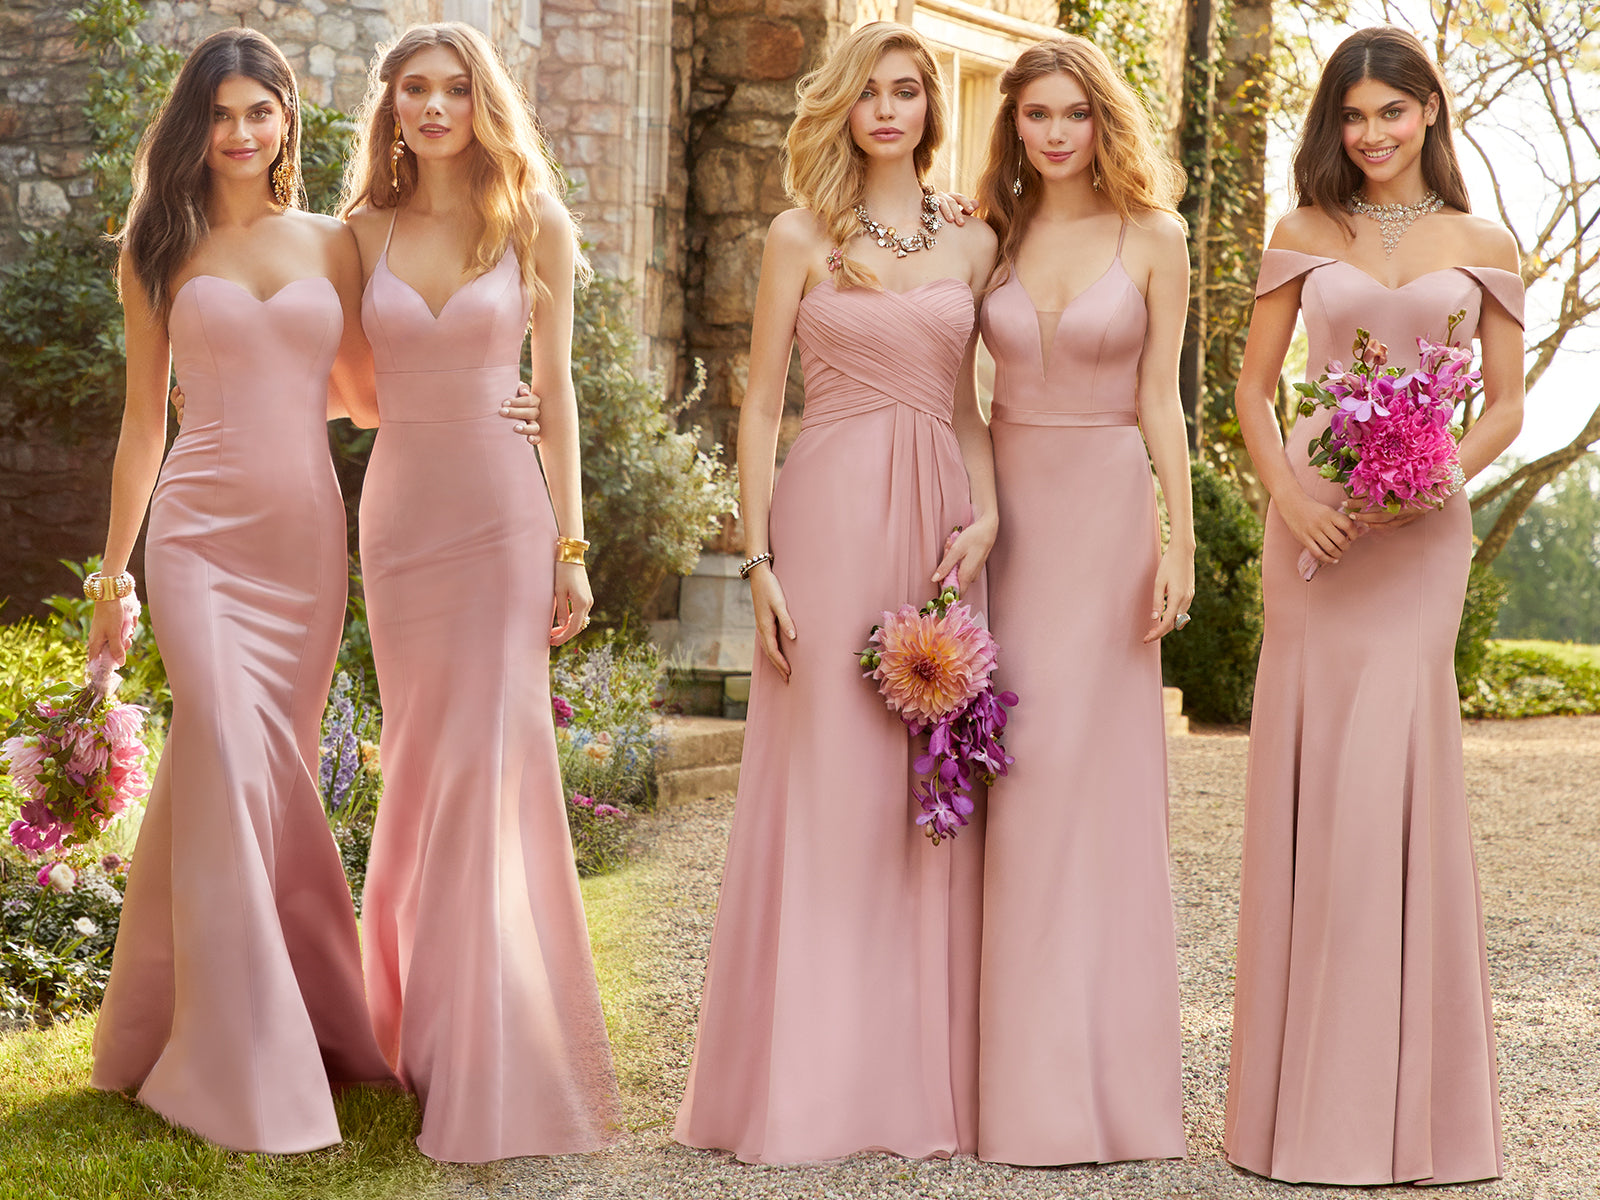 The NEW Bridesmaid Dress Collection by Camille La Vie